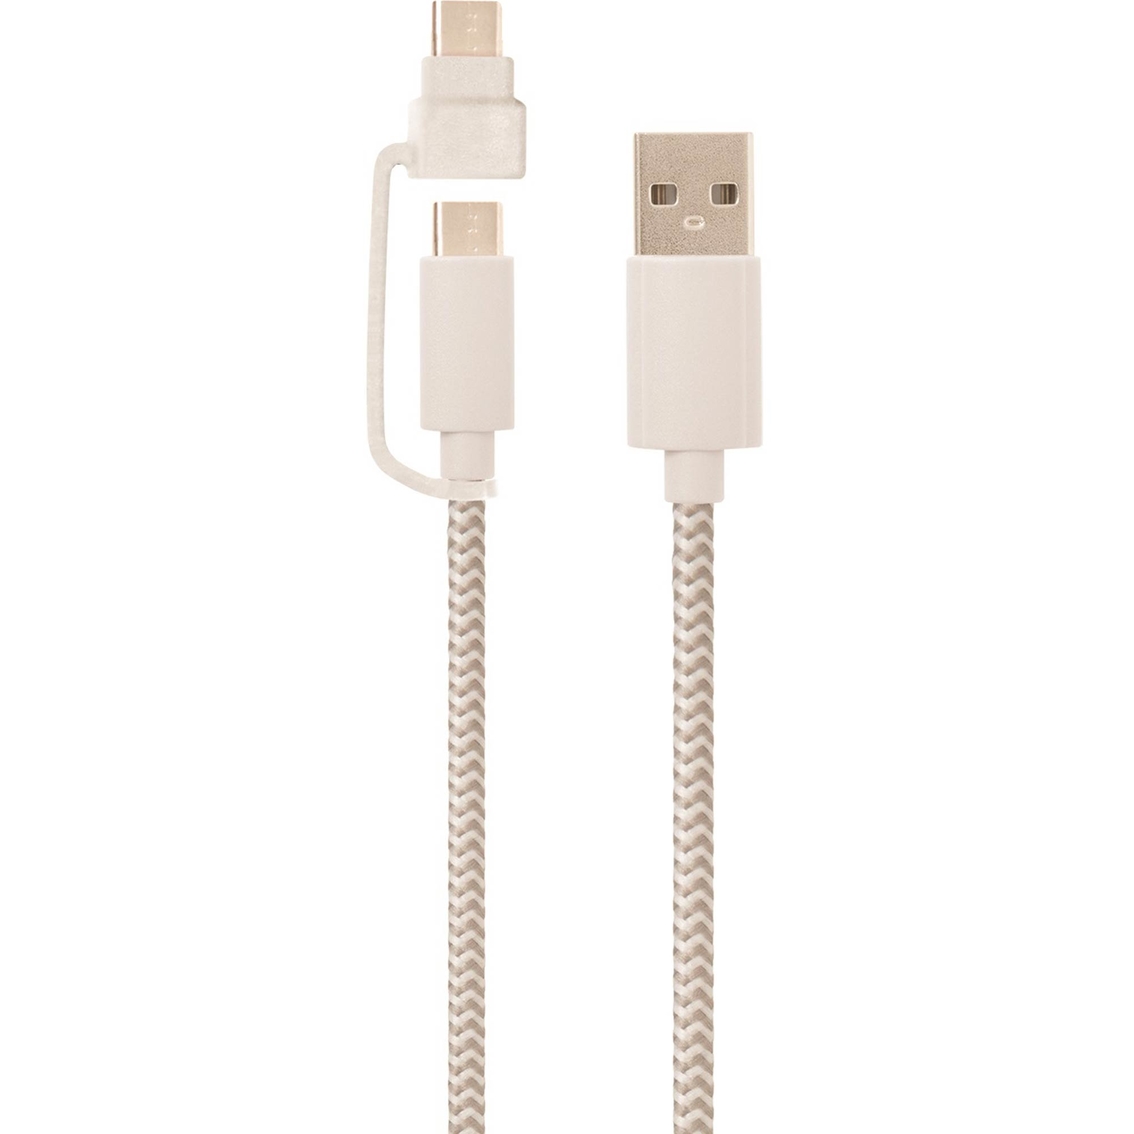 Helix 5 ft. USB-A to USB-C Charge and Sync Cable with Micro USB Adapter - Image 2 of 2